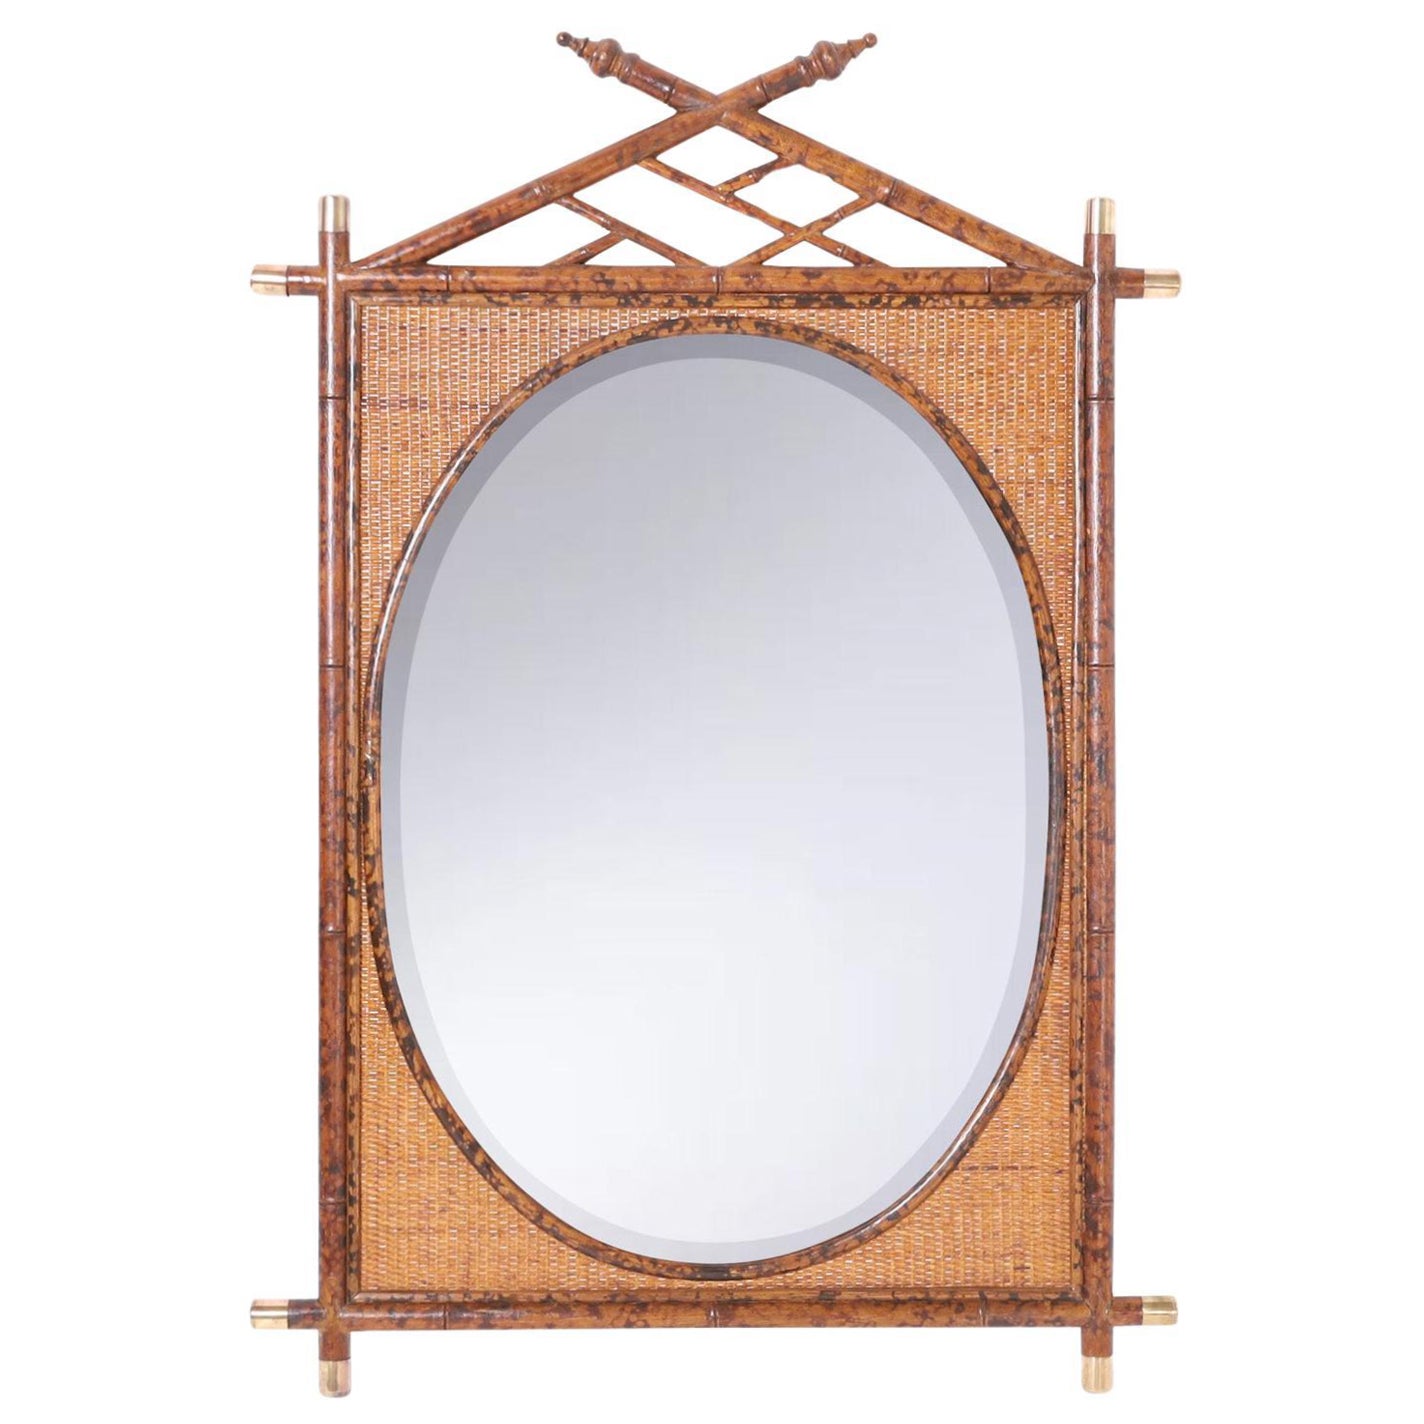 British Colonial Style Faux Bamboo and Grasscloth Wall Mirror